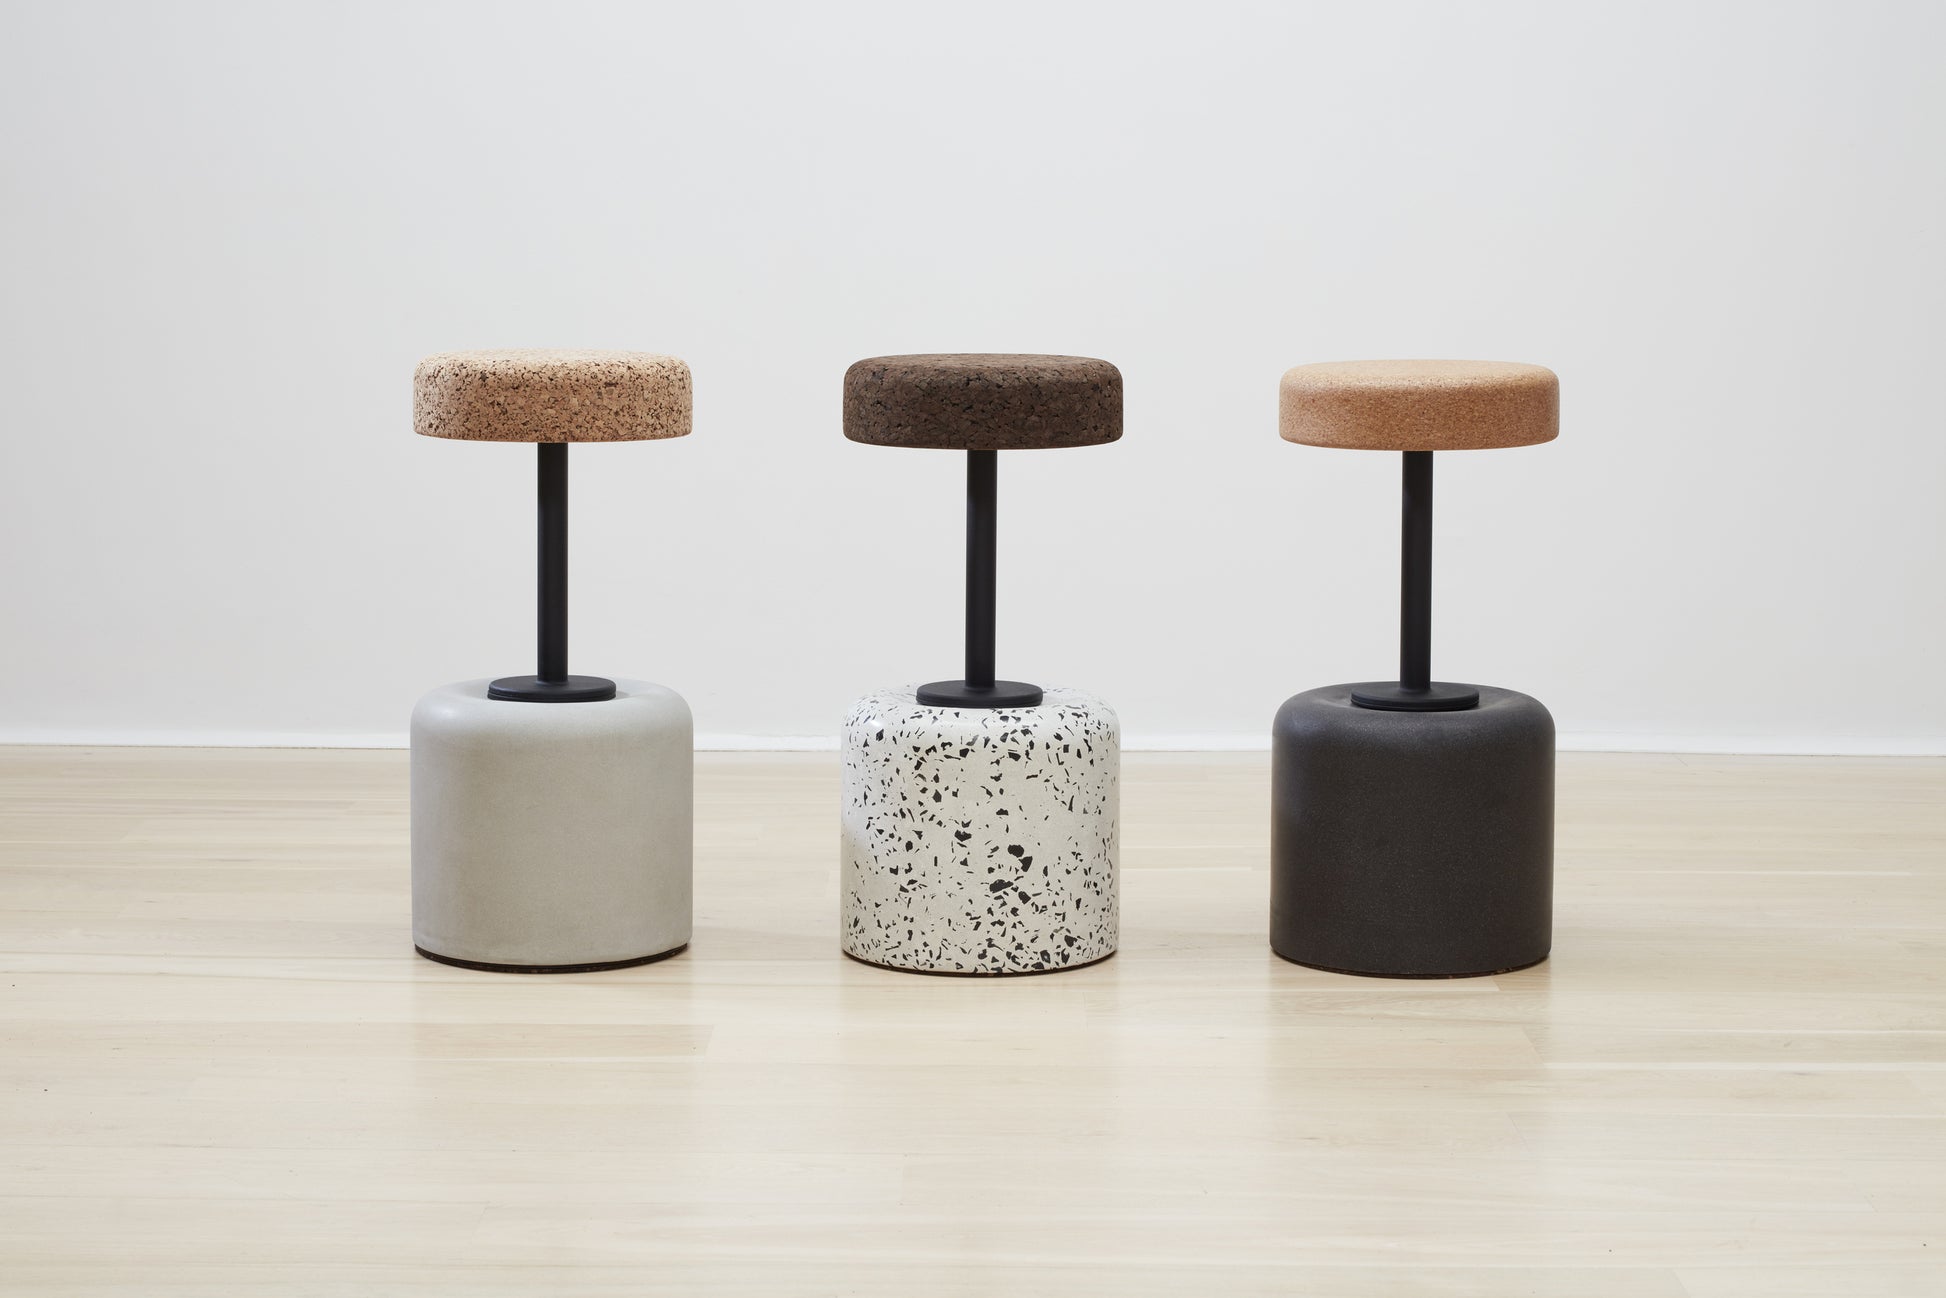 Collection of Kanju's Wiid Swivel Cork and Concrete Barstools showcasing a variety of finishes: Terrazzo, Natural Grey, and Charcoal Base. This image highlights the diversity and sophistication of the designs, featuring the unique texture of cork combined with durable concrete bases in different hues. Each barstool offers a blend of sustainable materials, swivel functionality, and contemporary style, suitable for modern bars and kitchens.